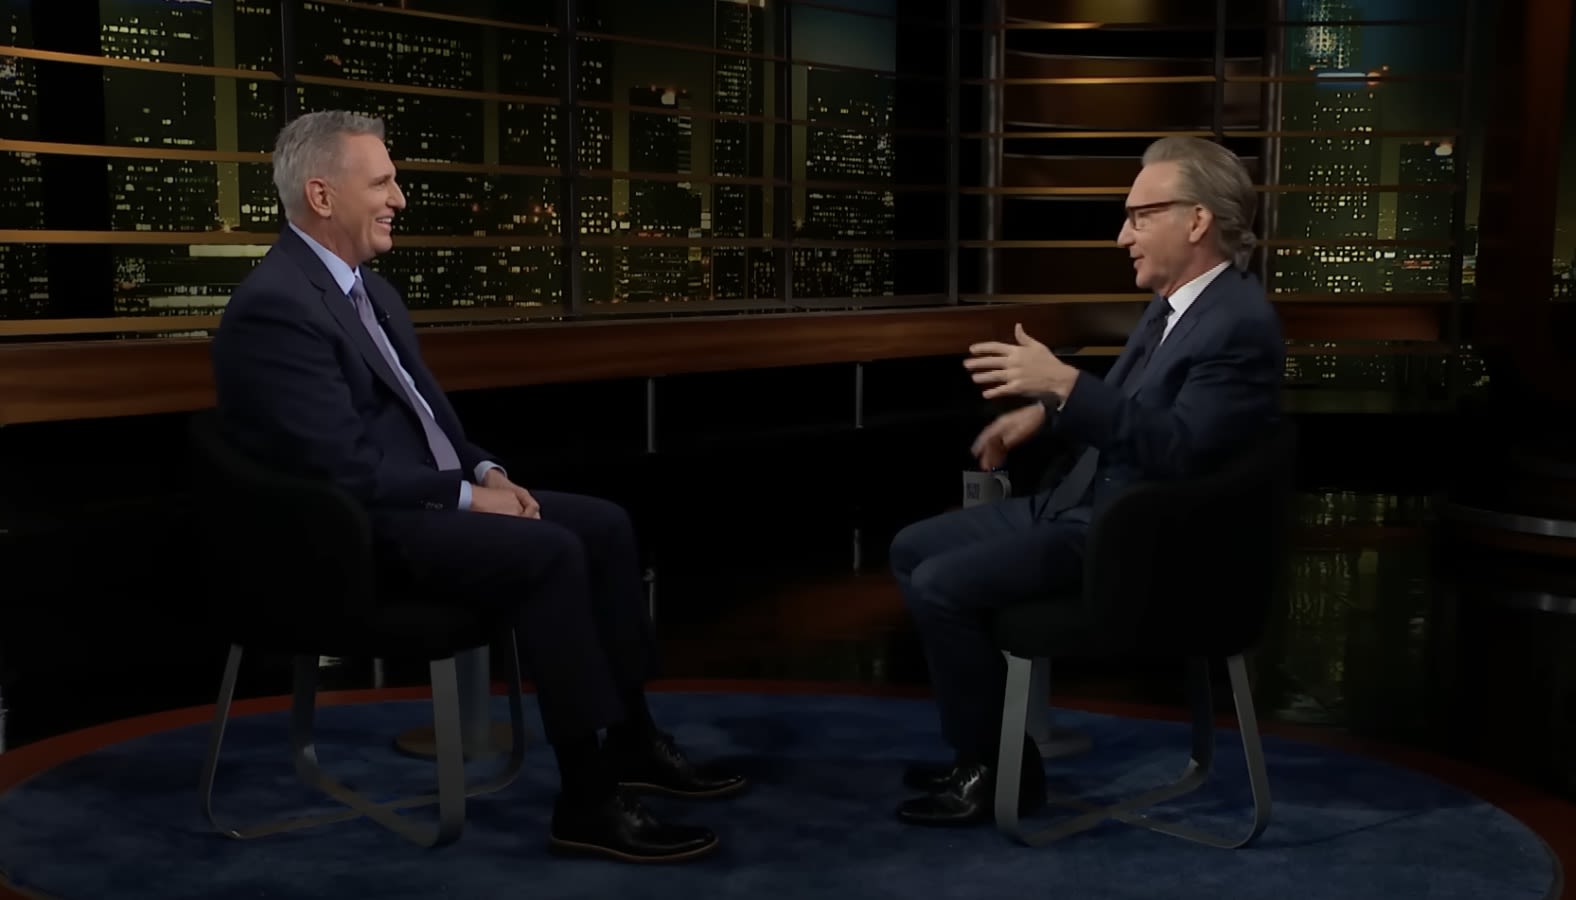 Bill Maher To Kevin McCarthy On Trump: “You Went To Mar-A-Lago And Kissed His Ass”